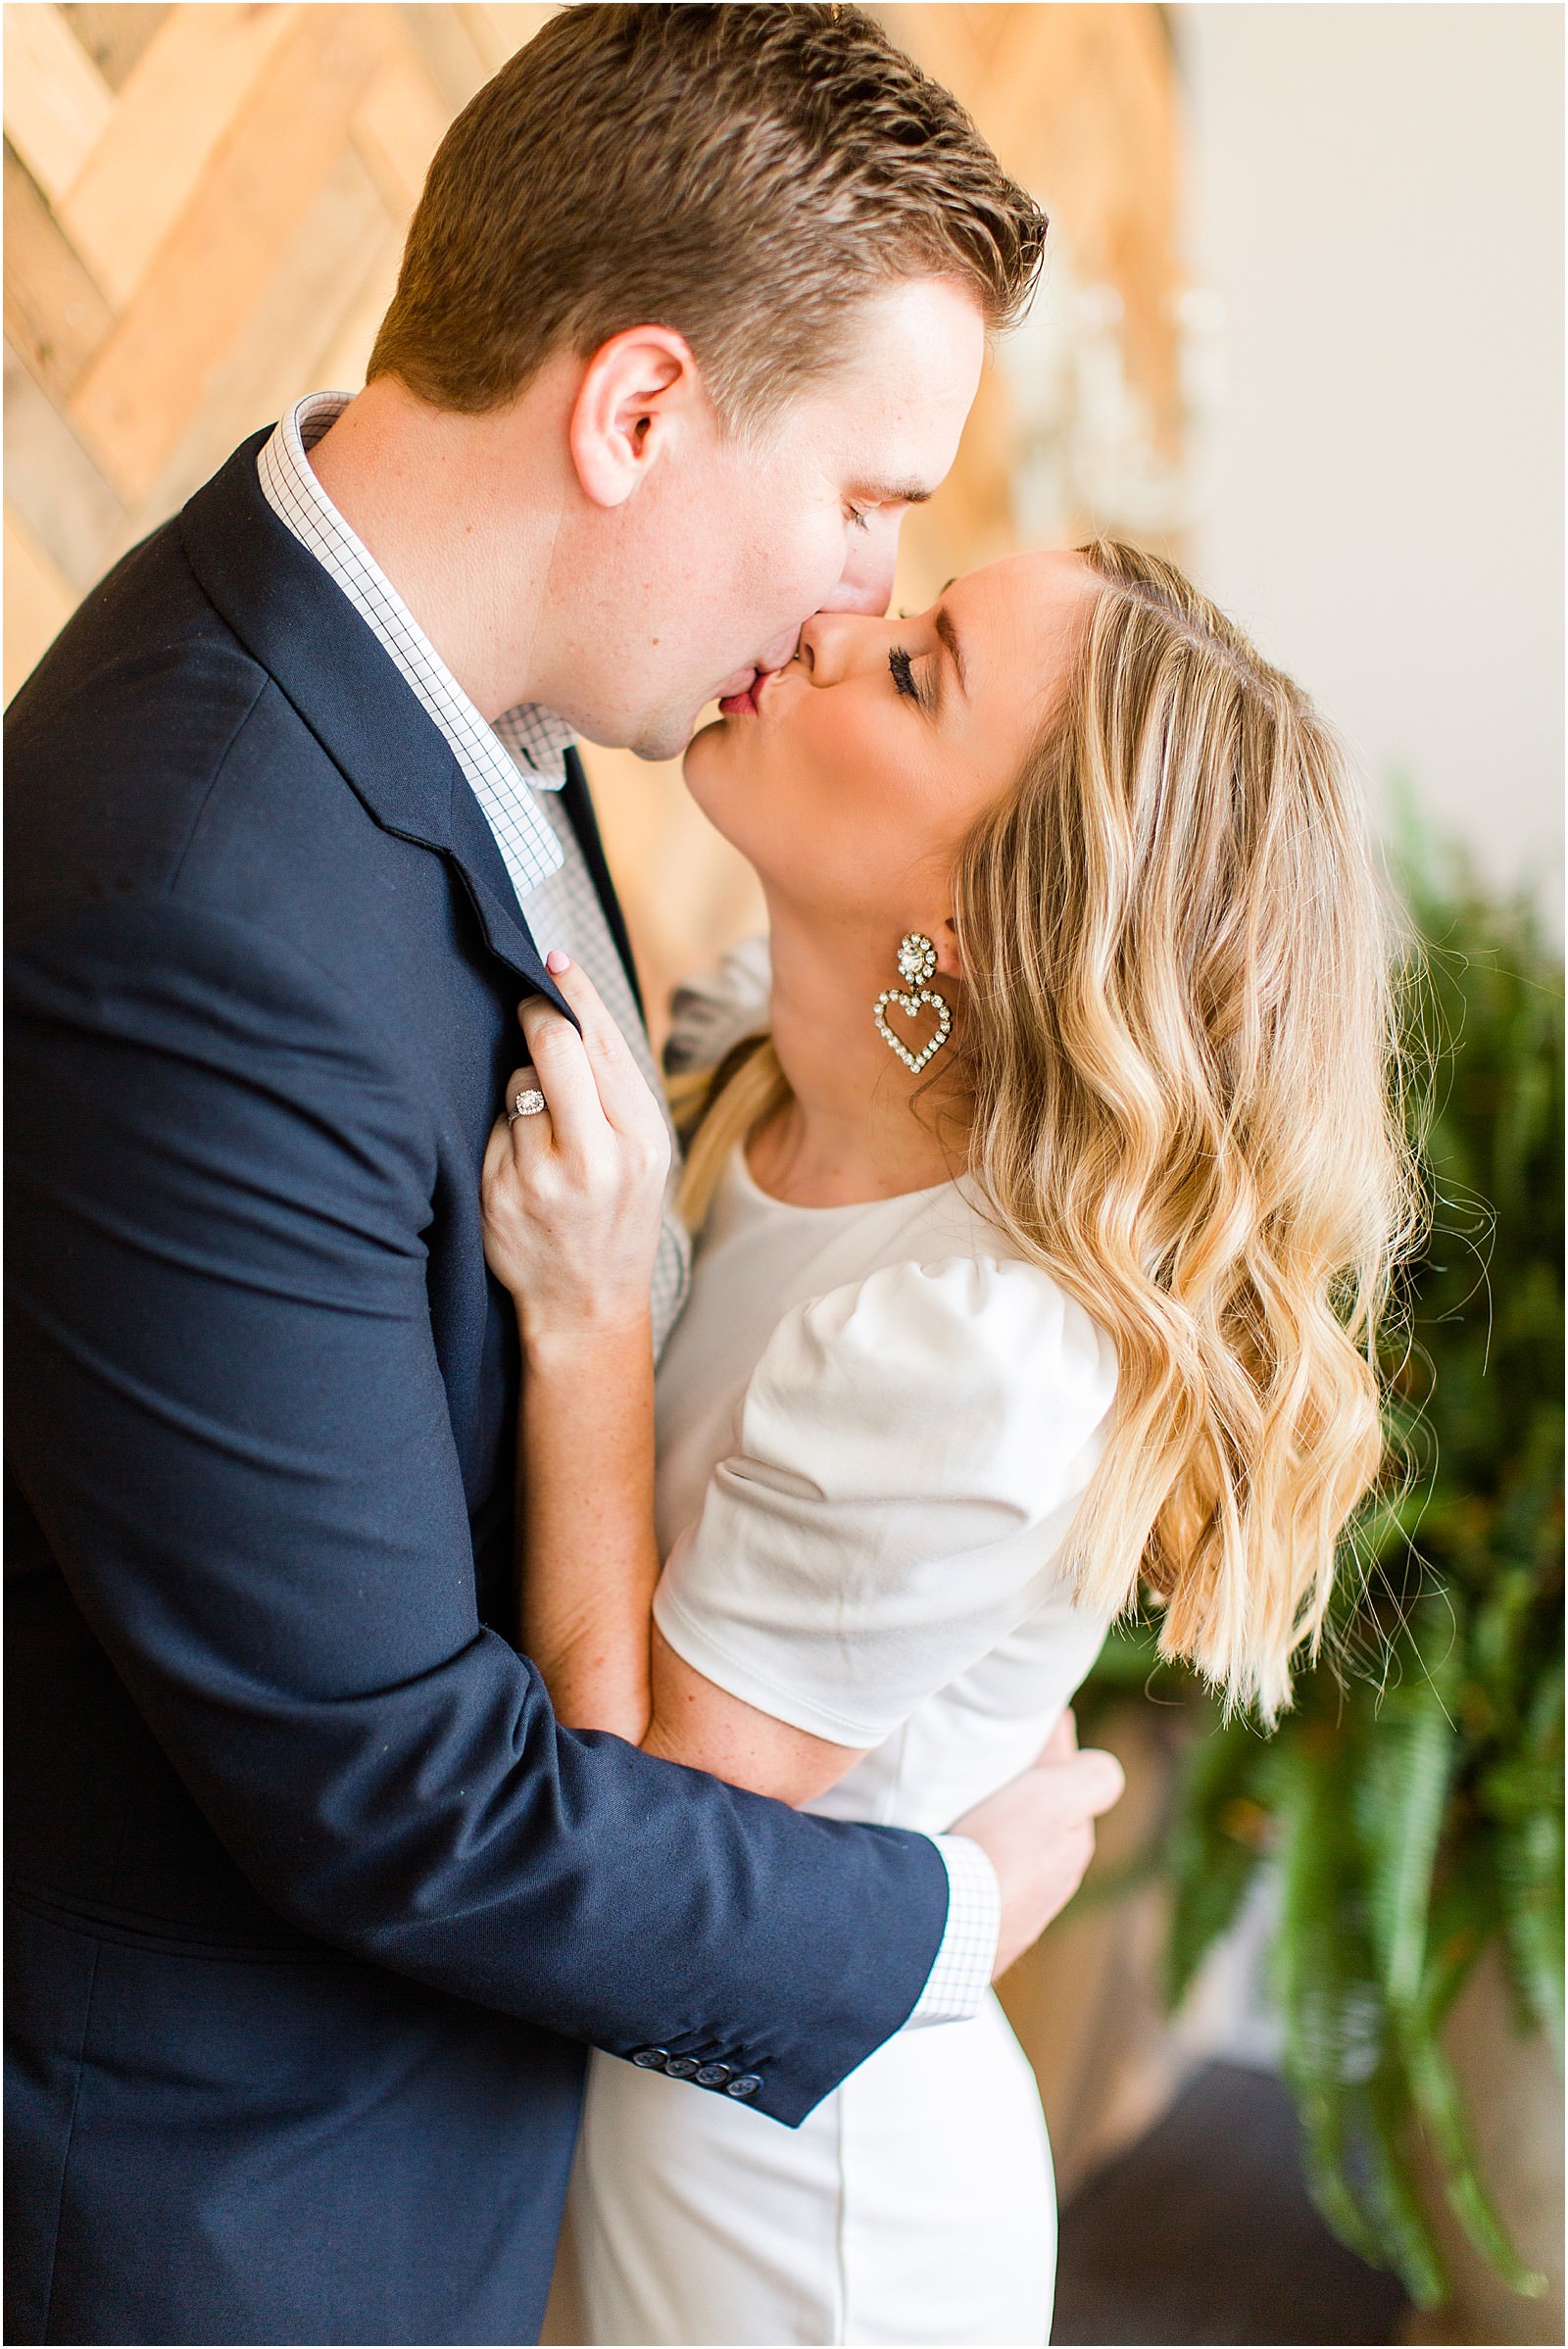 Madison and Christaan | A 20 West Engagement Session in Downto wn Newburgh | Bret and Brandie Photography021.jpg